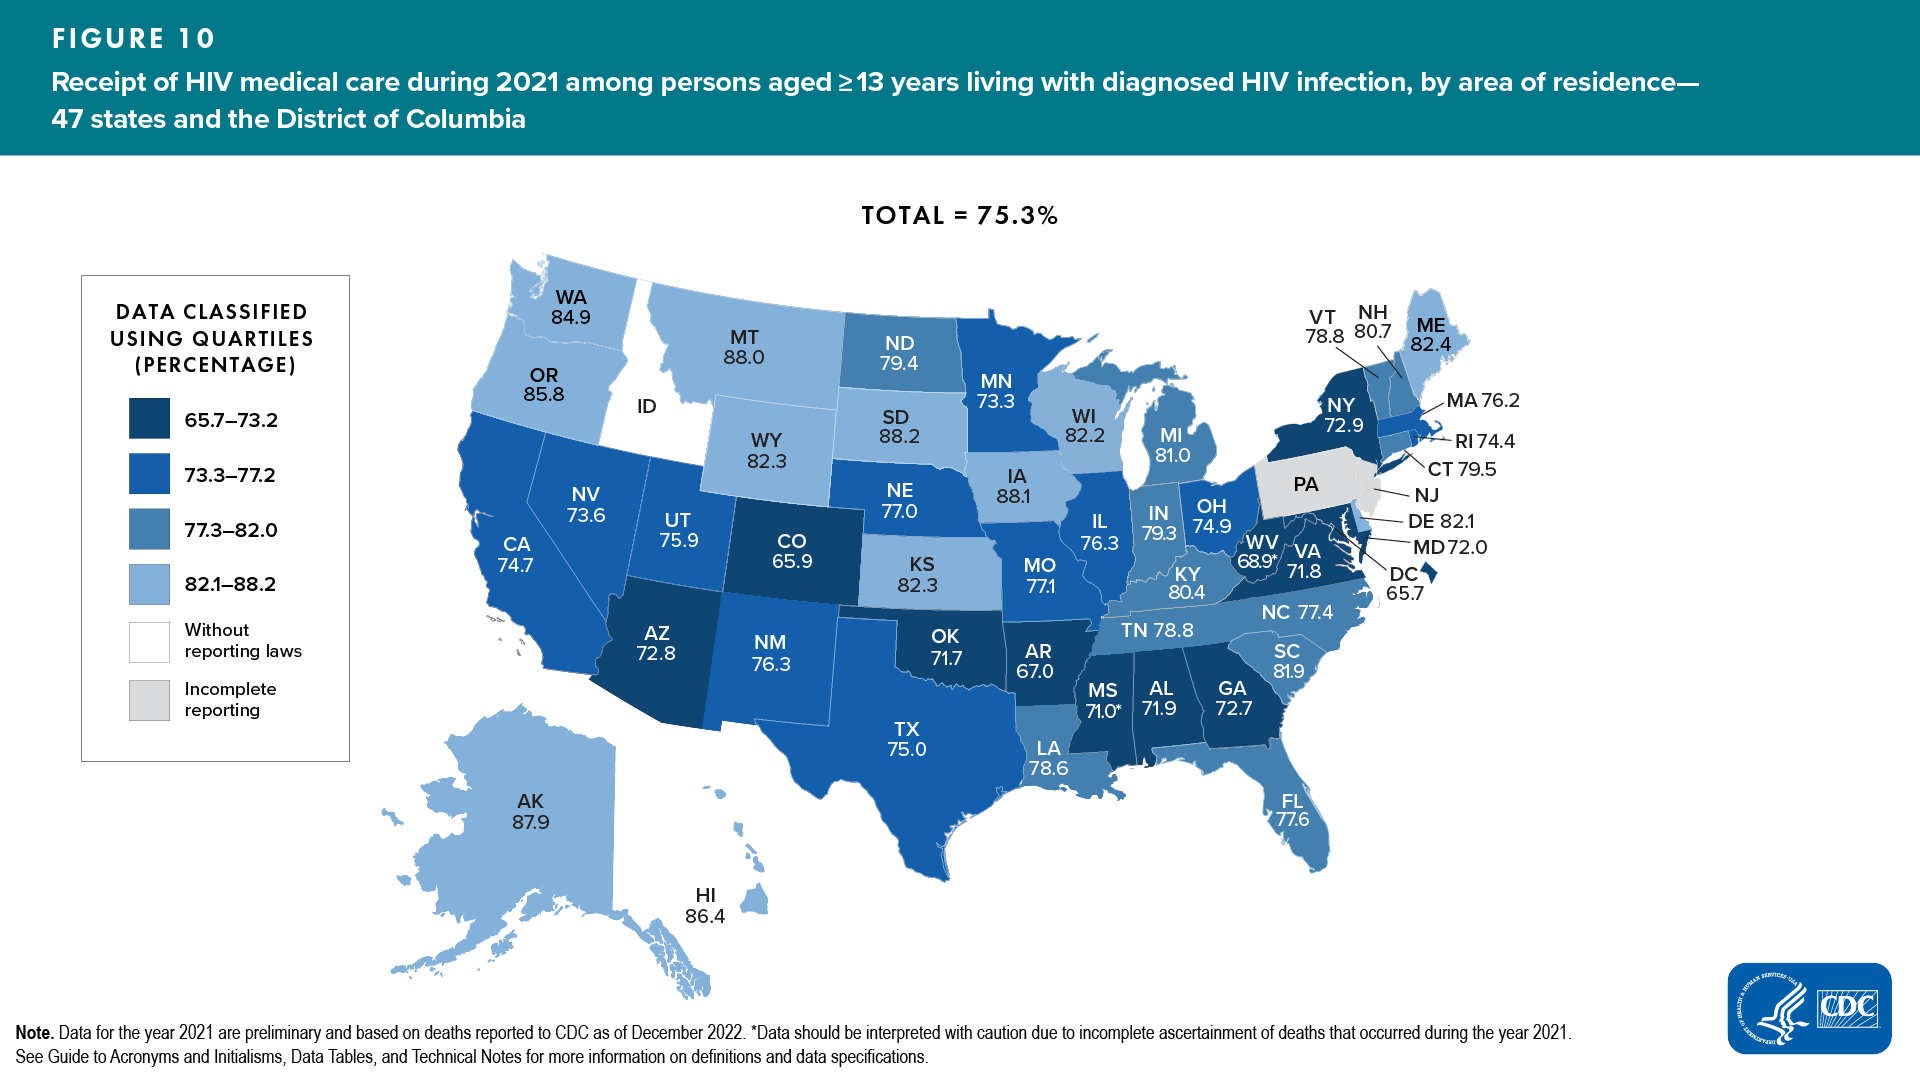 Figure 10. Receipt of HIV medical care during 2021 among persons aged ≥13 years living with diagnosed HIV infection, by area of residence — 47 states and the District of Columbia